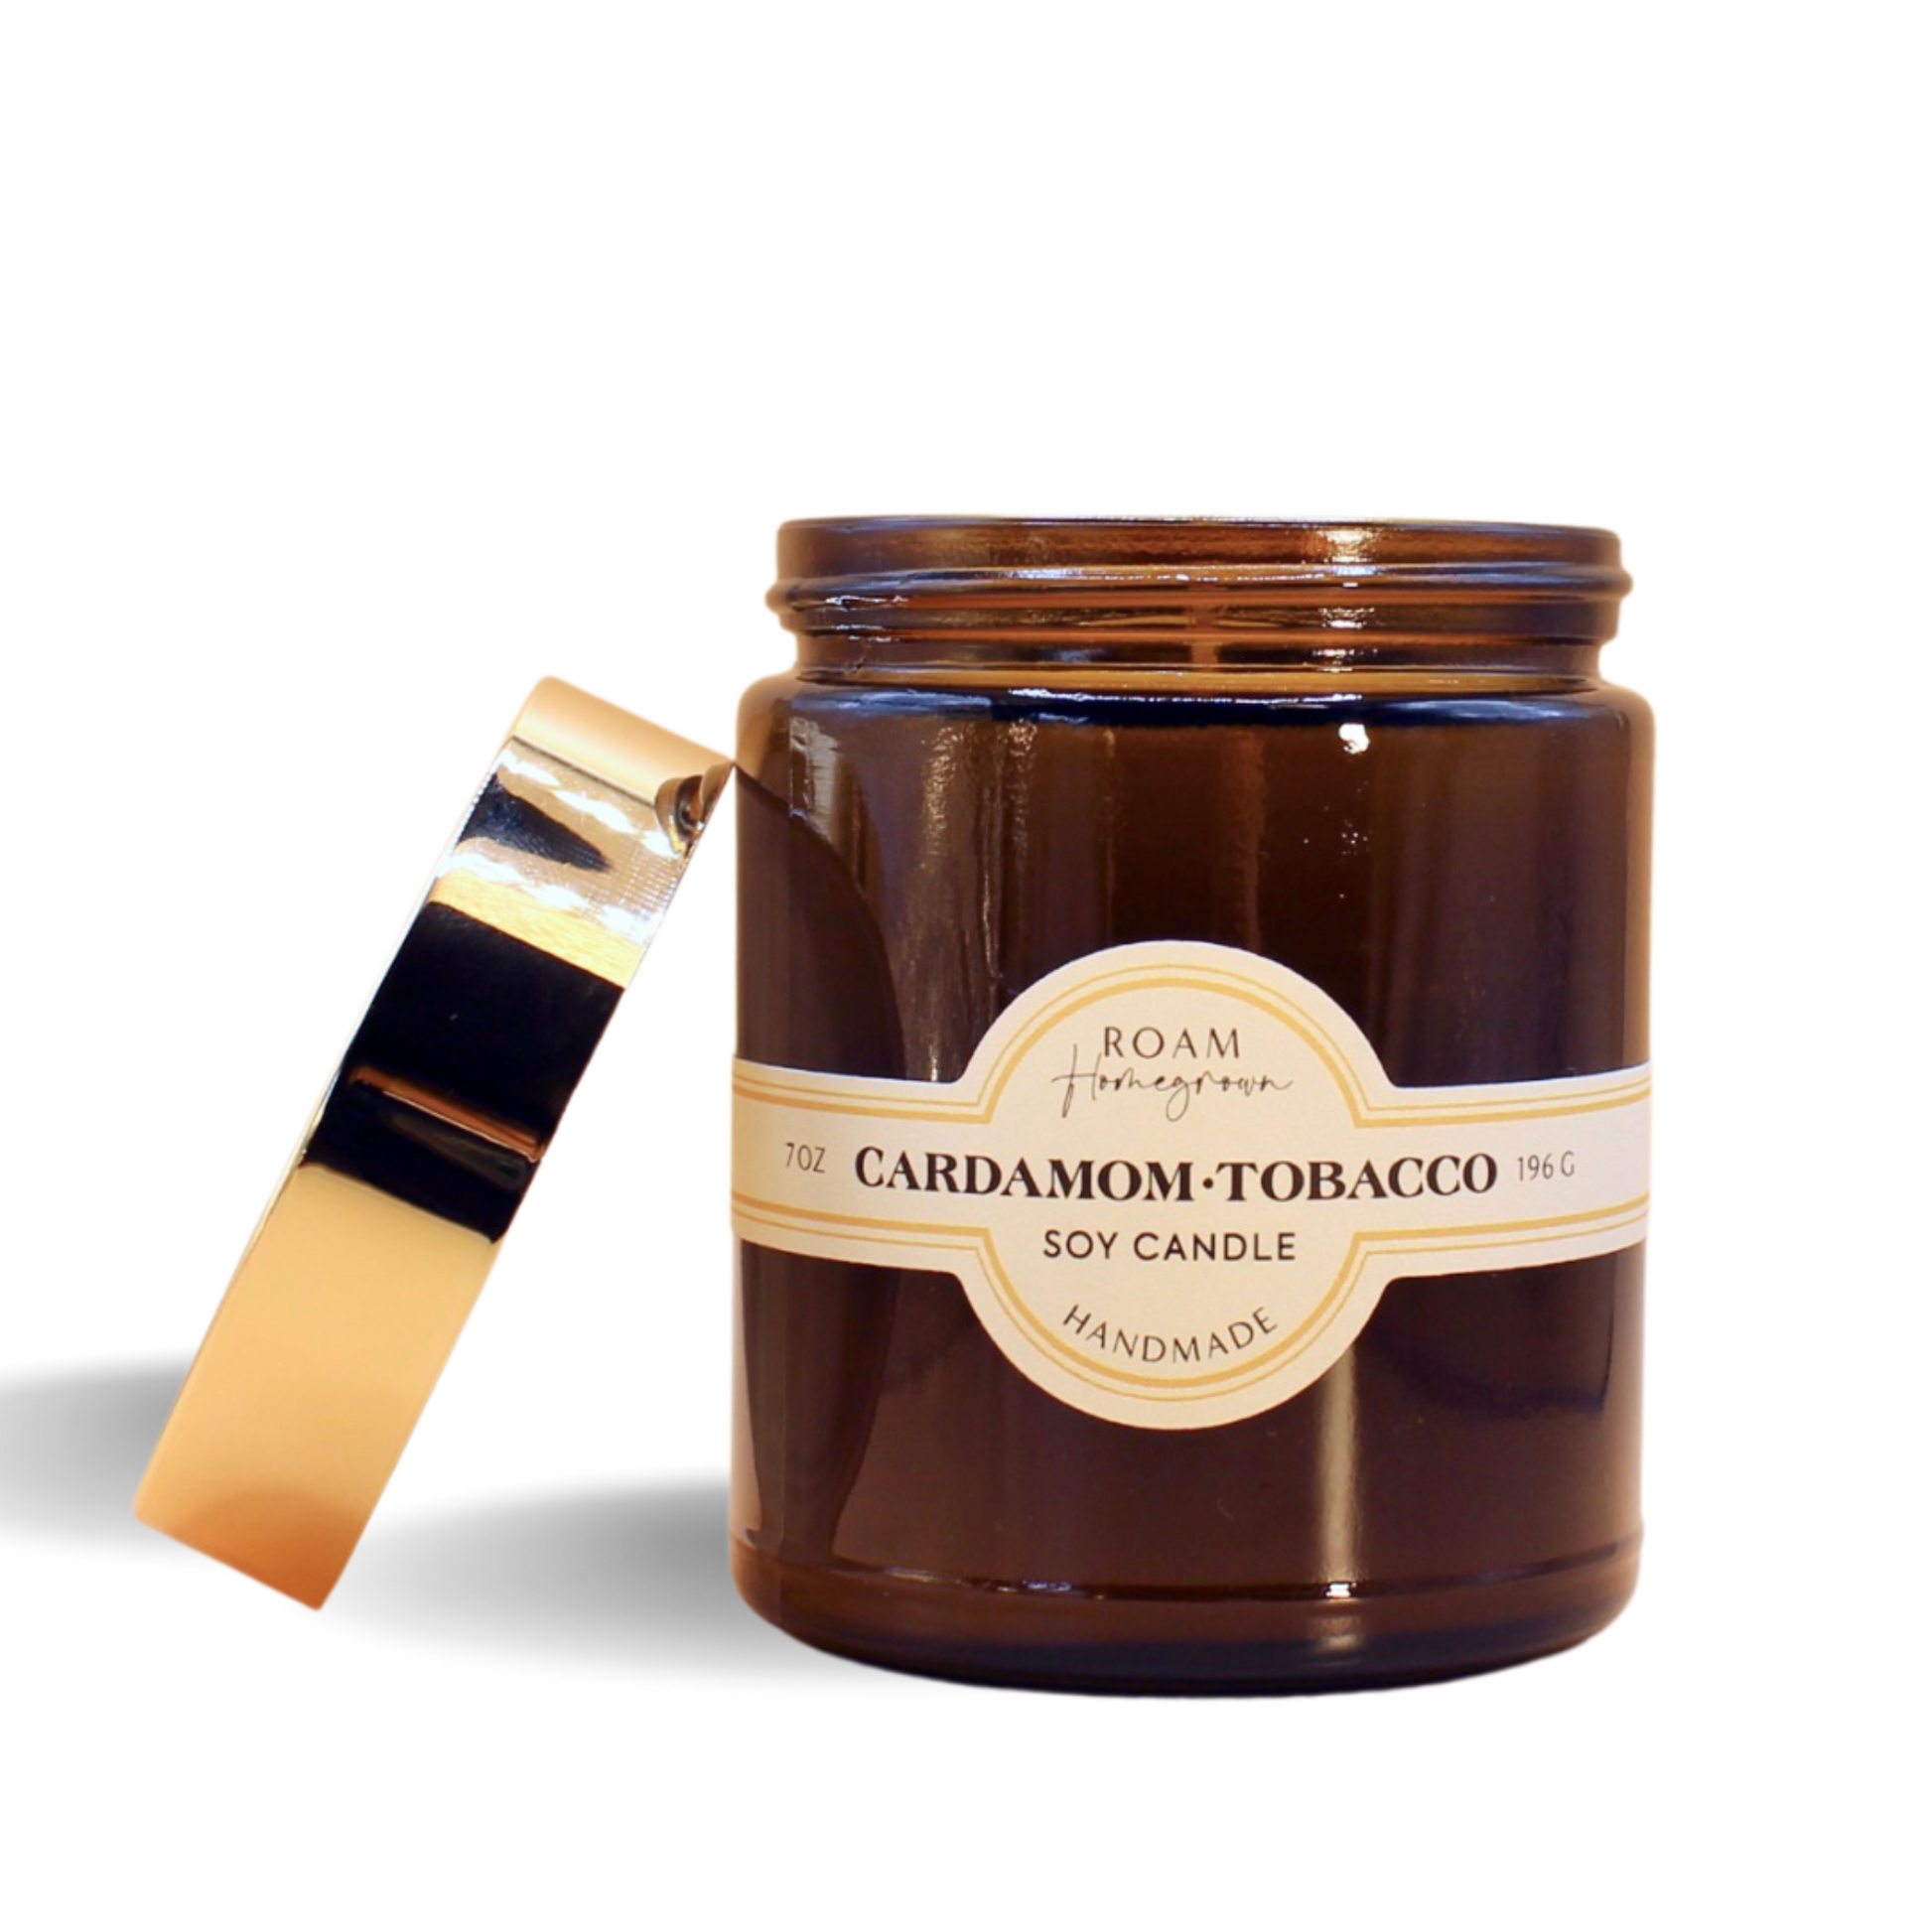 cardamom tobacco hand poured natural soy candle